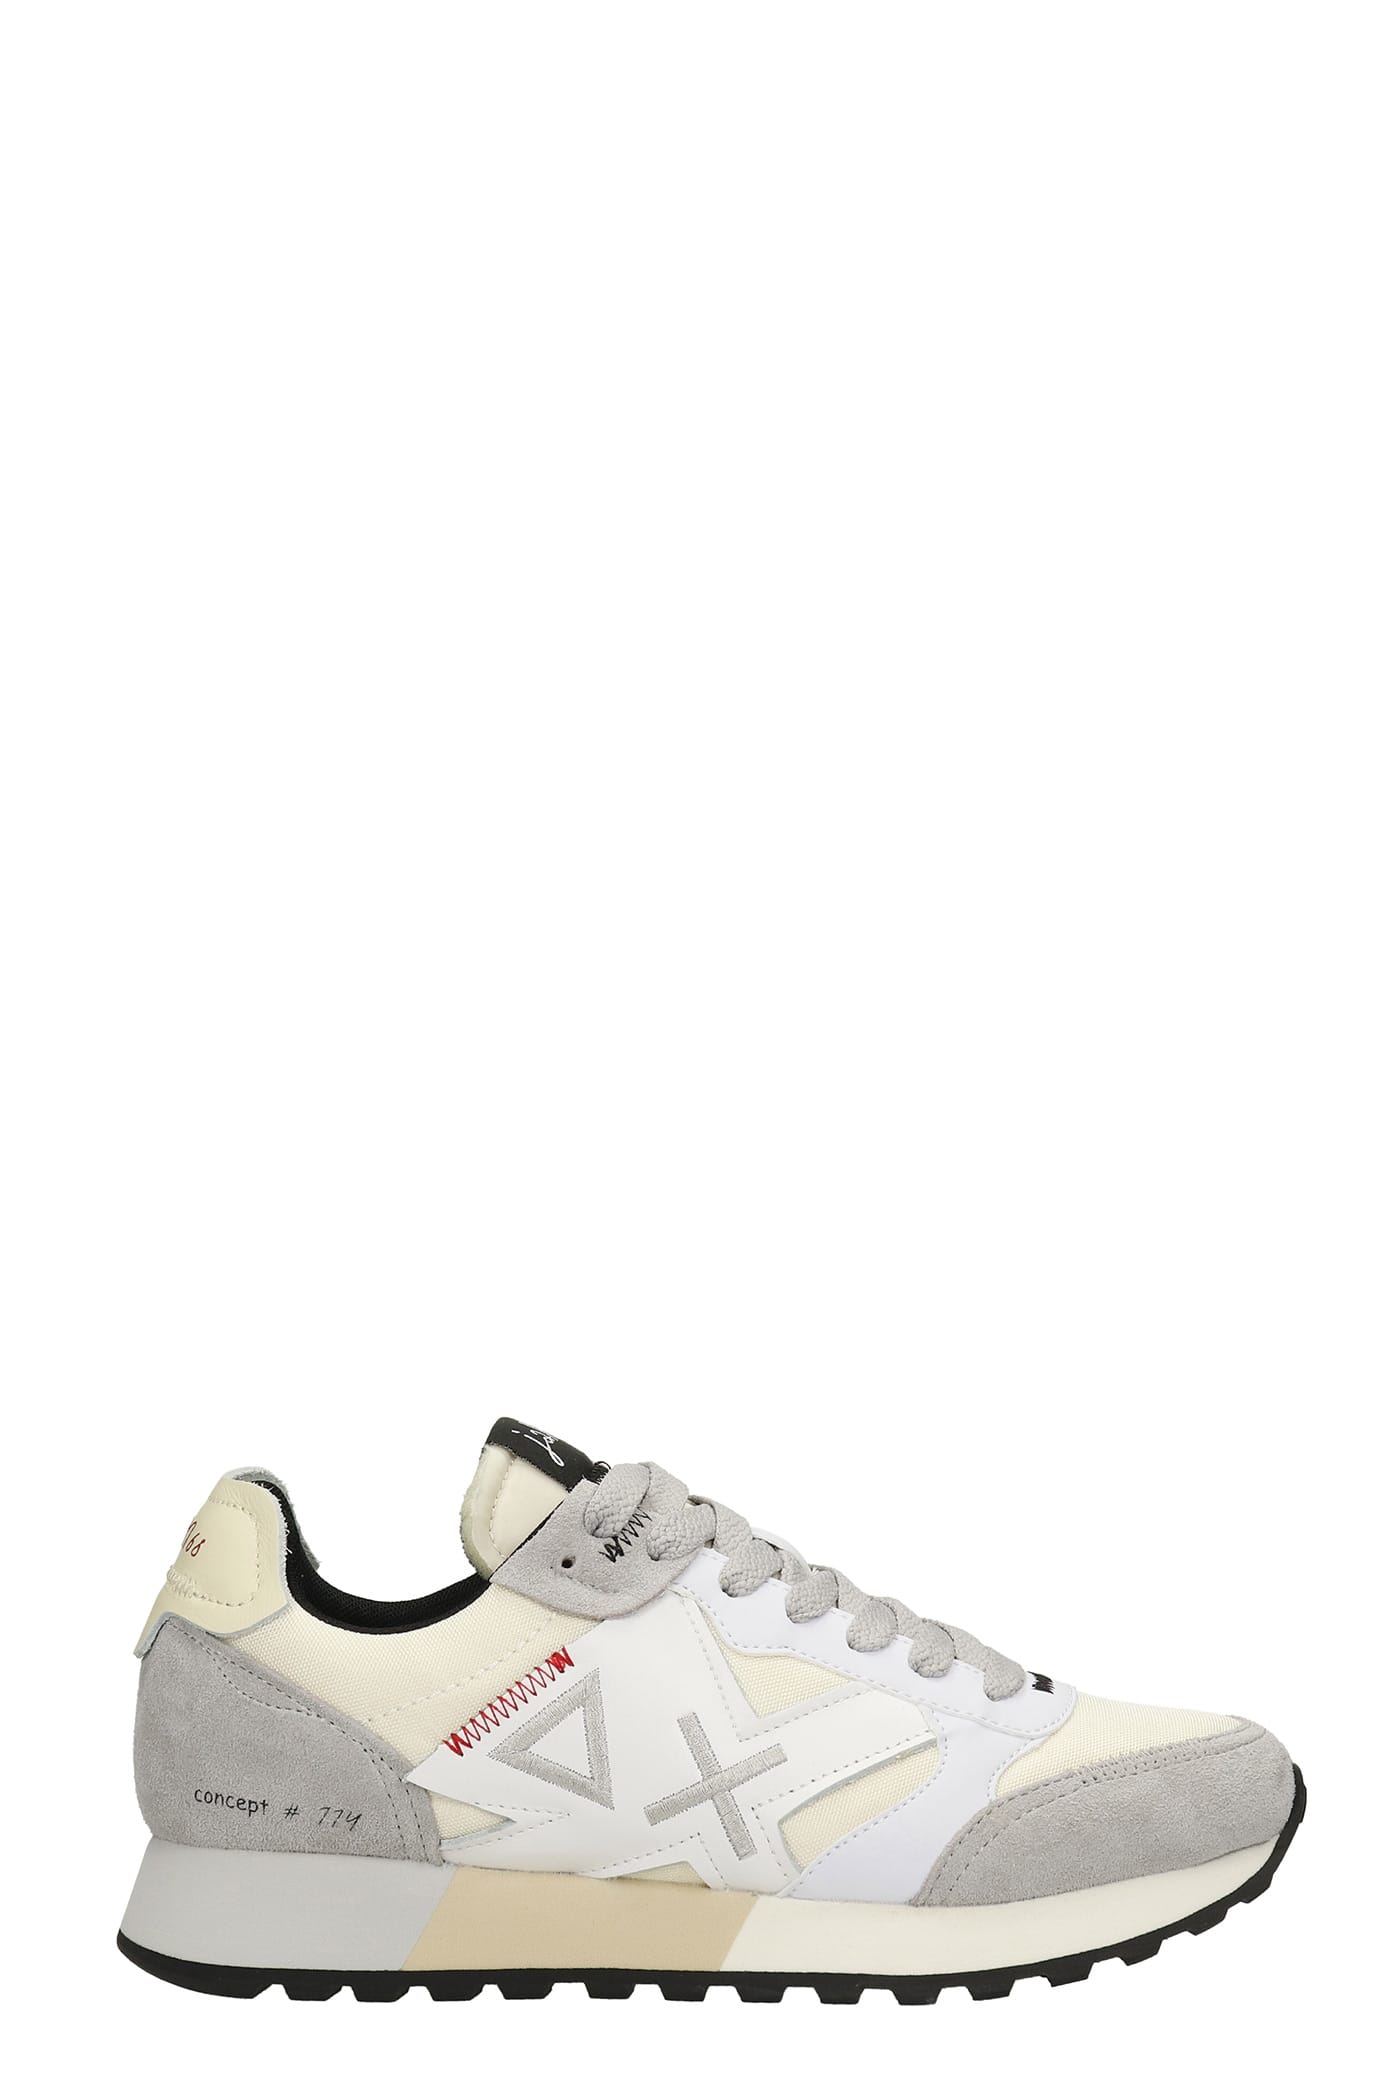 Sun 68 Uncle Jaki Sneakers In White Suede And Fabric